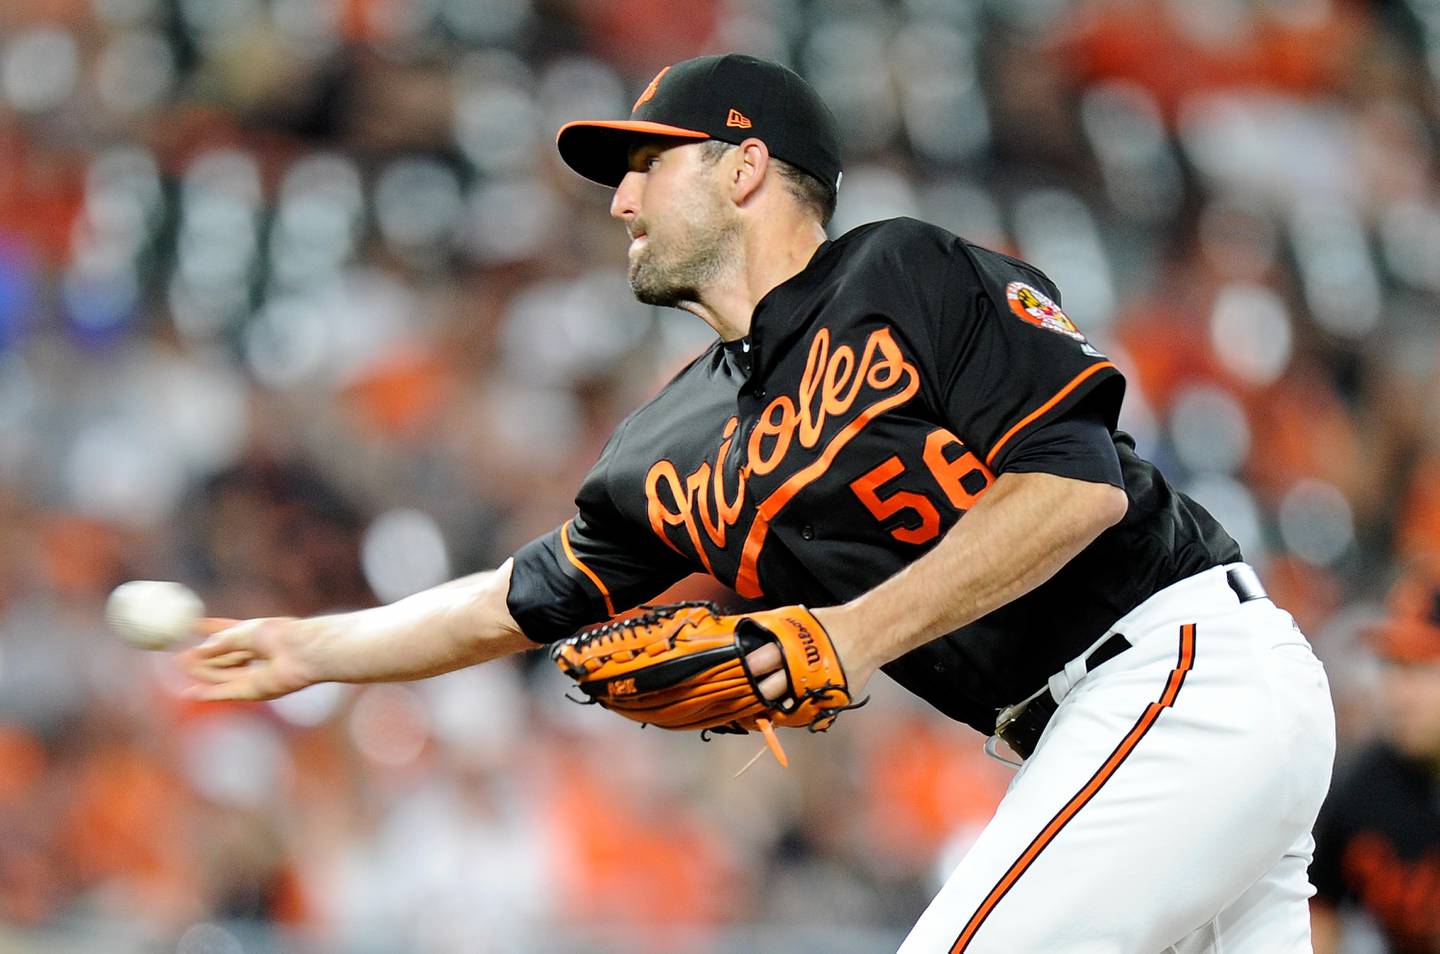 BALTIMORE, MD - JUNE 15:  Darren O'Day #56 of the Baltimore Orioles pitches in the ninth inning against the Miami Marlins at Oriole Park at Camden Yards on June 15, 2018 in Baltimore, Maryland.